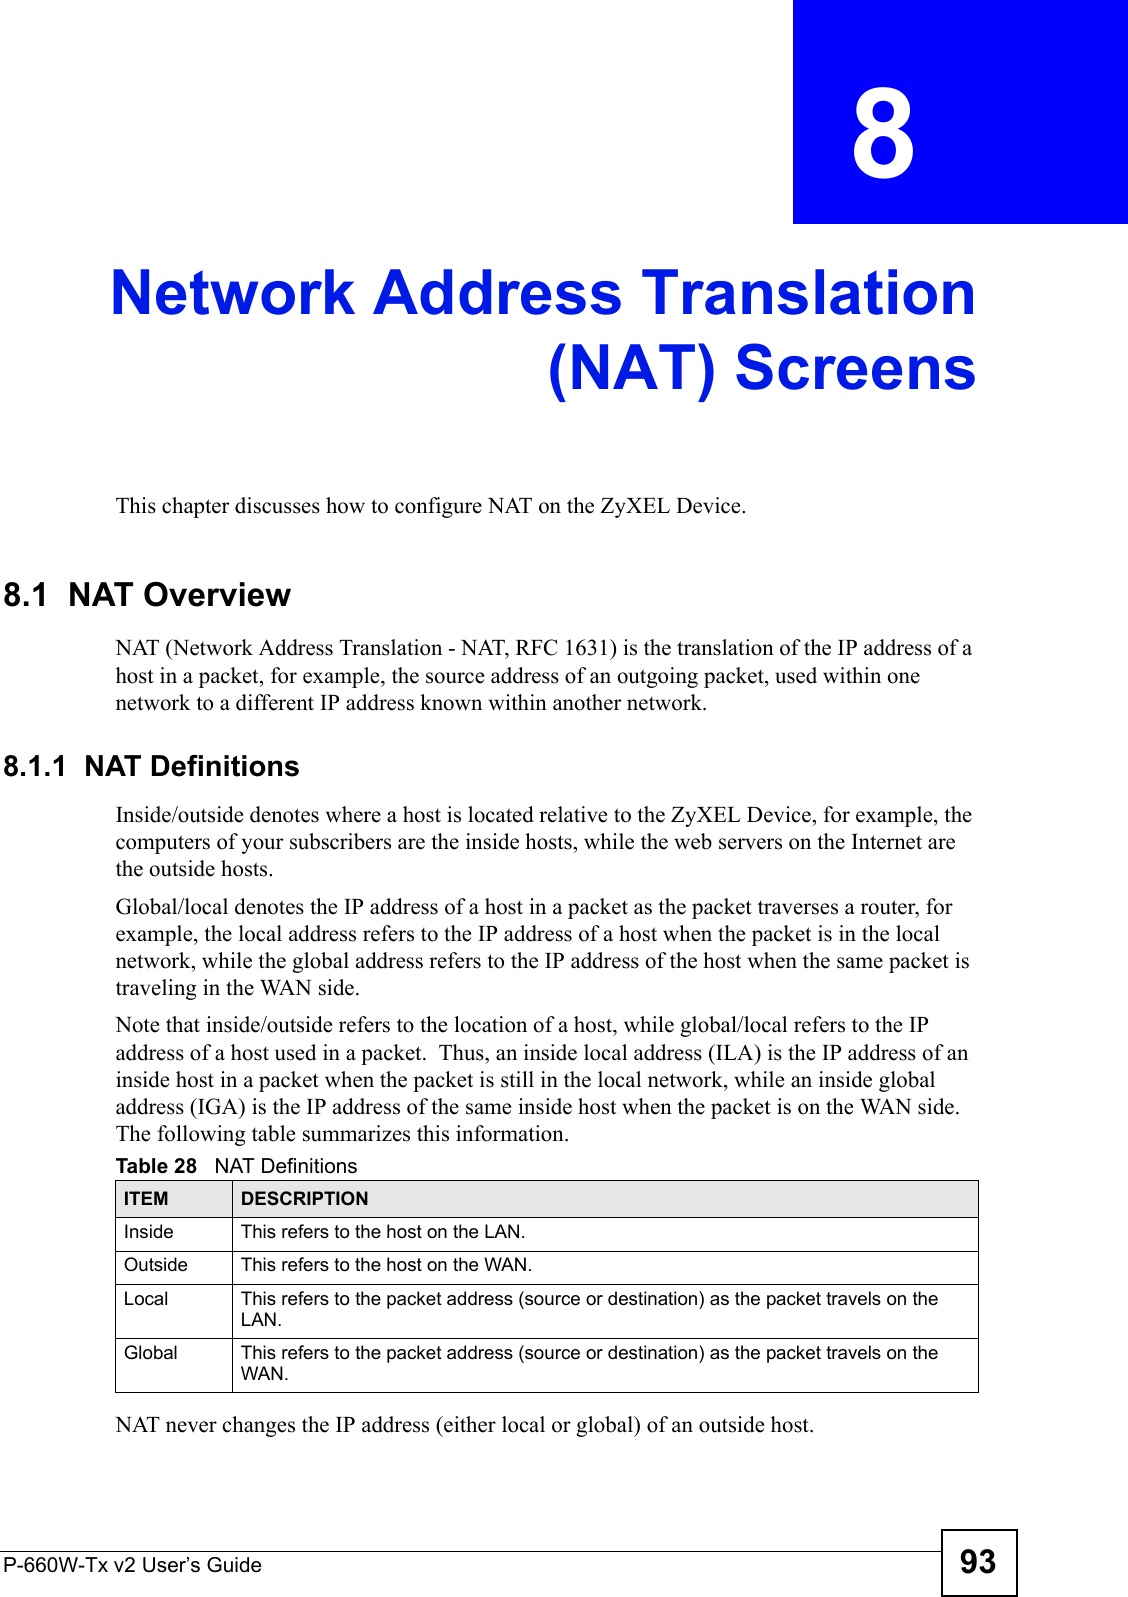 P-660W-Tx v2 User’s Guide 93CHAPTER  8 Network Address Translation(NAT) ScreensThis chapter discusses how to configure NAT on the ZyXEL Device.8.1  NAT Overview NAT (Network Address Translation - NAT, RFC 1631) is the translation of the IP address of a host in a packet, for example, the source address of an outgoing packet, used within one network to a different IP address known within another network. 8.1.1  NAT DefinitionsInside/outside denotes where a host is located relative to the ZyXEL Device, for example, the computers of your subscribers are the inside hosts, while the web servers on the Internet are the outside hosts. Global/local denotes the IP address of a host in a packet as the packet traverses a router, for example, the local address refers to the IP address of a host when the packet is in the local network, while the global address refers to the IP address of the host when the same packet is traveling in the WAN side. Note that inside/outside refers to the location of a host, while global/local refers to the IP address of a host used in a packet.  Thus, an inside local address (ILA) is the IP address of an inside host in a packet when the packet is still in the local network, while an inside global address (IGA) is the IP address of the same inside host when the packet is on the WAN side. The following table summarizes this information.NAT never changes the IP address (either local or global) of an outside host.Table 28   NAT DefinitionsITEM DESCRIPTIONInside This refers to the host on the LAN.Outside This refers to the host on the WAN.Local This refers to the packet address (source or destination) as the packet travels on the LAN.Global This refers to the packet address (source or destination) as the packet travels on the WAN.